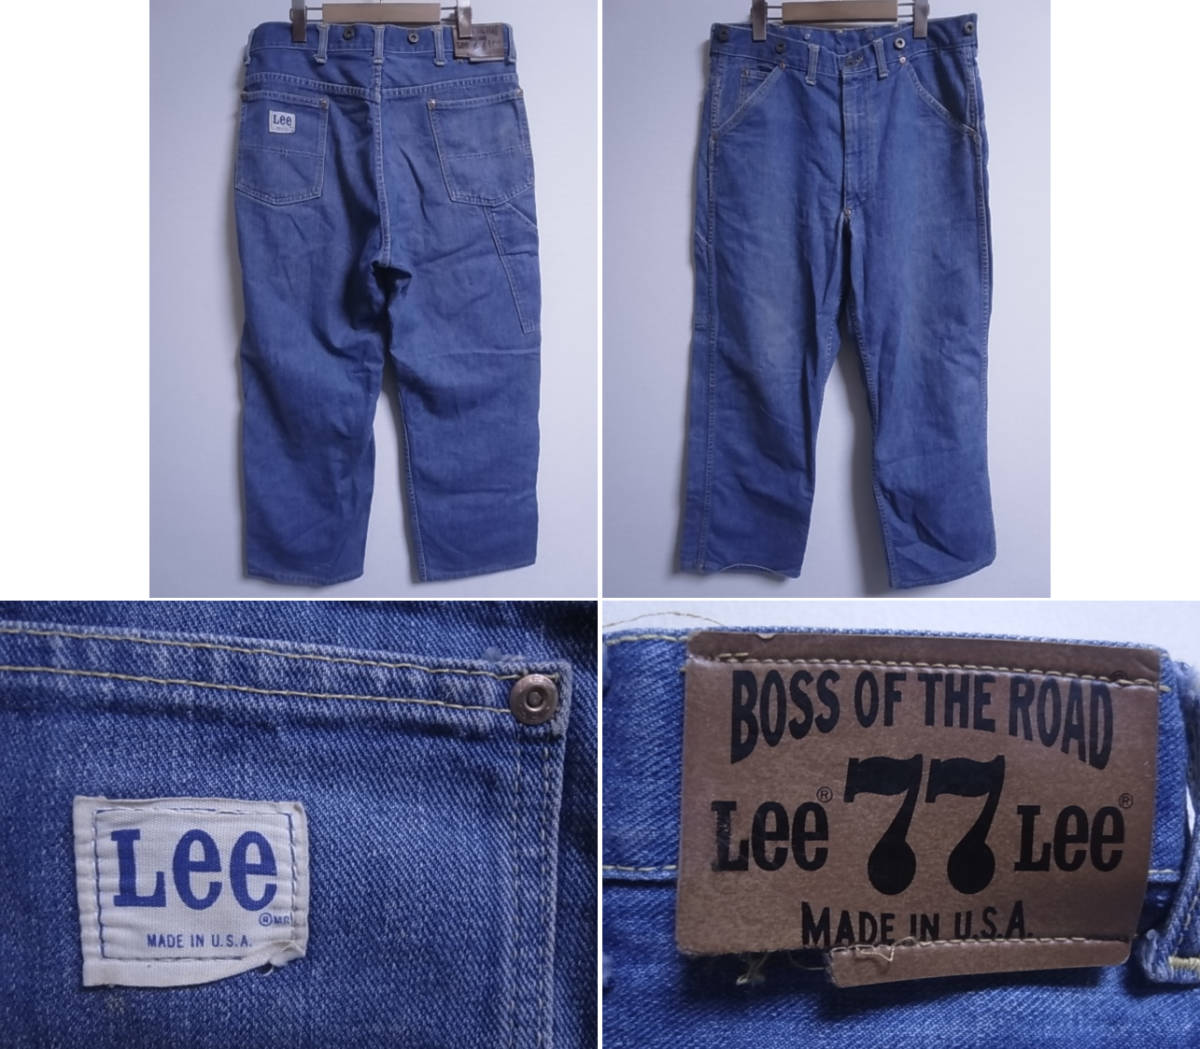 V1/2208★レア★アメリカ製★ヴィンテージ 70s リー Lee 77 BOSS OF THE ROAD デニム ペインターパンツ Made in USA